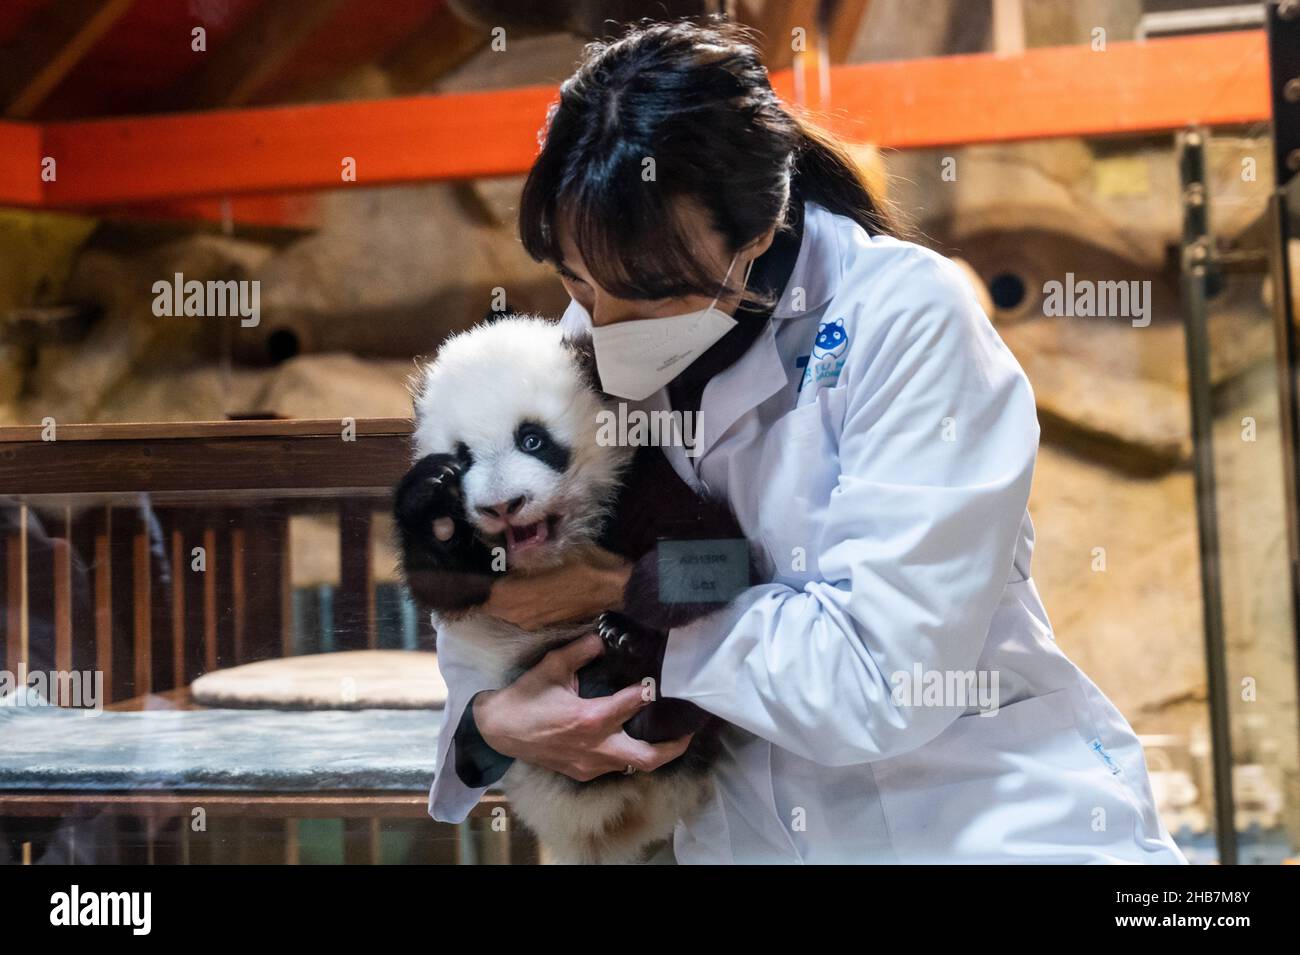 Madrid, Spain. 17th Dec, 2021. A worker of the Zoo is seen with a baby panda bear. Two little twin pandas have received their names (Jiu Jiu and You You) according to the Chinese tradition after 100 days of being born, during a ceremony at the Zoo of Madrid. Credit: Marcos del Mazo/Alamy Live News Stock Photo